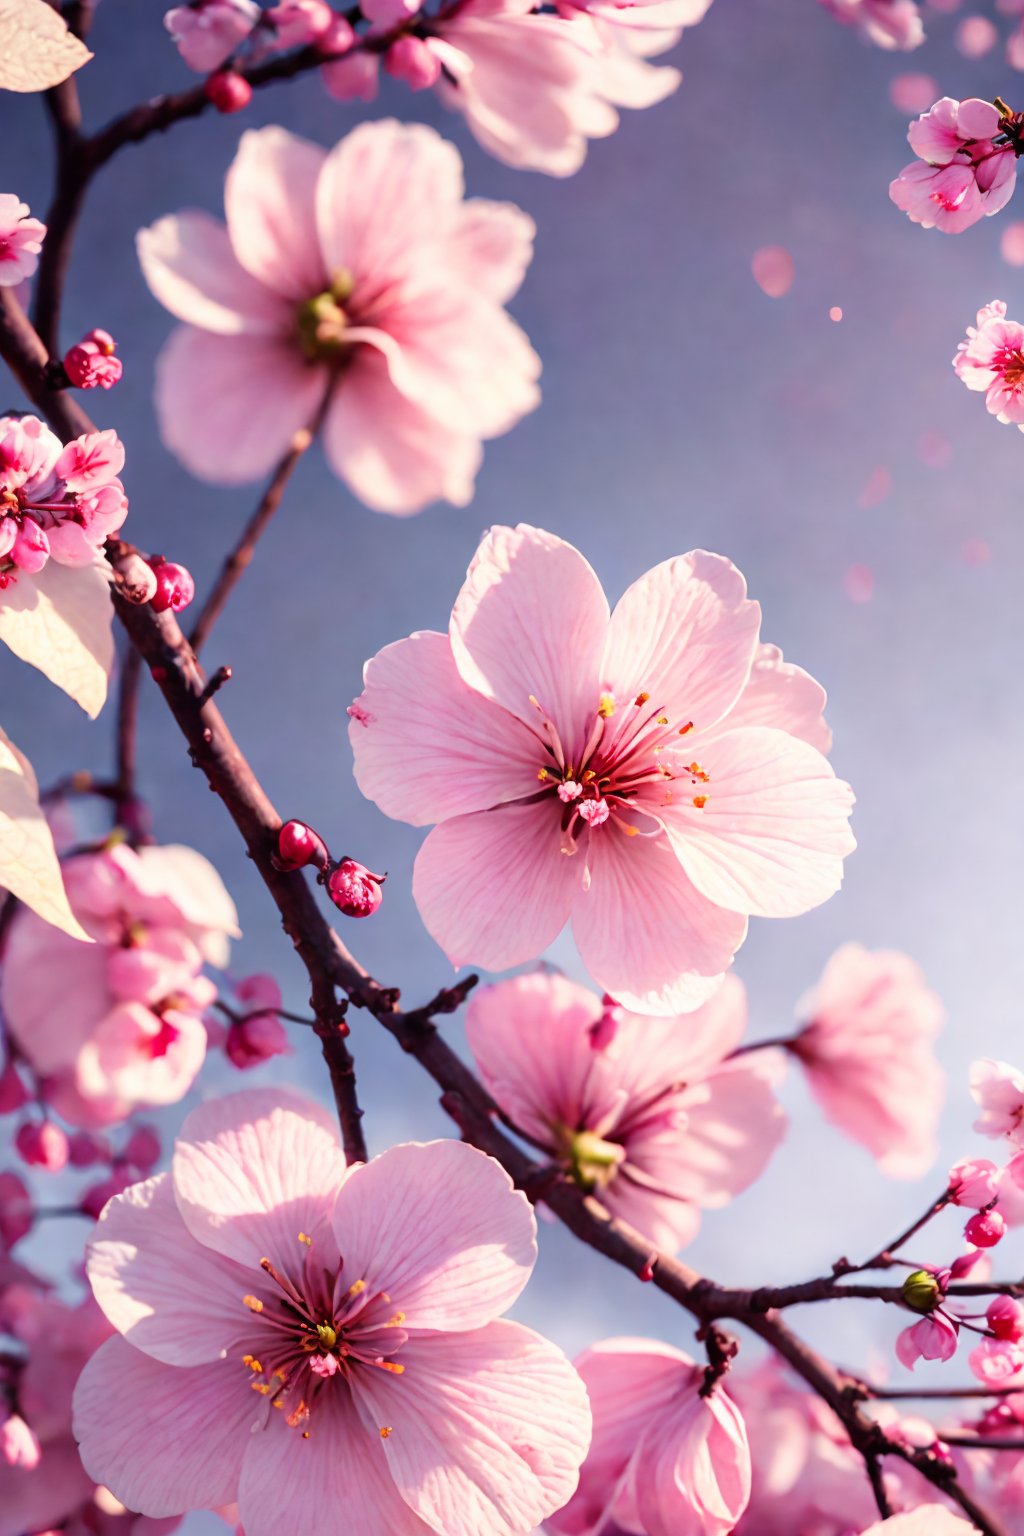 (best quality,4k,8k,highres,masterpiece:1.2),ultra-detailed,(realistic,photorealistic,photo-realistic:1.37),cherry tree,cherry flower,close up,macro photography,beautiful delicate cherry blossoms,vibrant pink petals,fragrant scent of cherry blossoms,subtle play of light and shadow on the tree branches,soft sunlight filtering through the cherry blossoms,captivating beauty of nature in full bloom,springtime serenity,peaceful atmosphere under the cherry tree,blossoming branches reaching towards the sky,fresh green leaves juxtaposed with the vibrant pink flowers,delicate details of the cherry petals,small insects buzzing around the flowers,pollen gently carried by the breeze,bees collecting nectar from the cherry blossoms,up-close view of the intricate flower structure,petals gently swaying in the wind,immersive experience of being surrounded by cherry blossoms,every petal showcasing its unique beauty,ethereal and dreamlike ambiance,refreshing and rejuvenating natural scene.